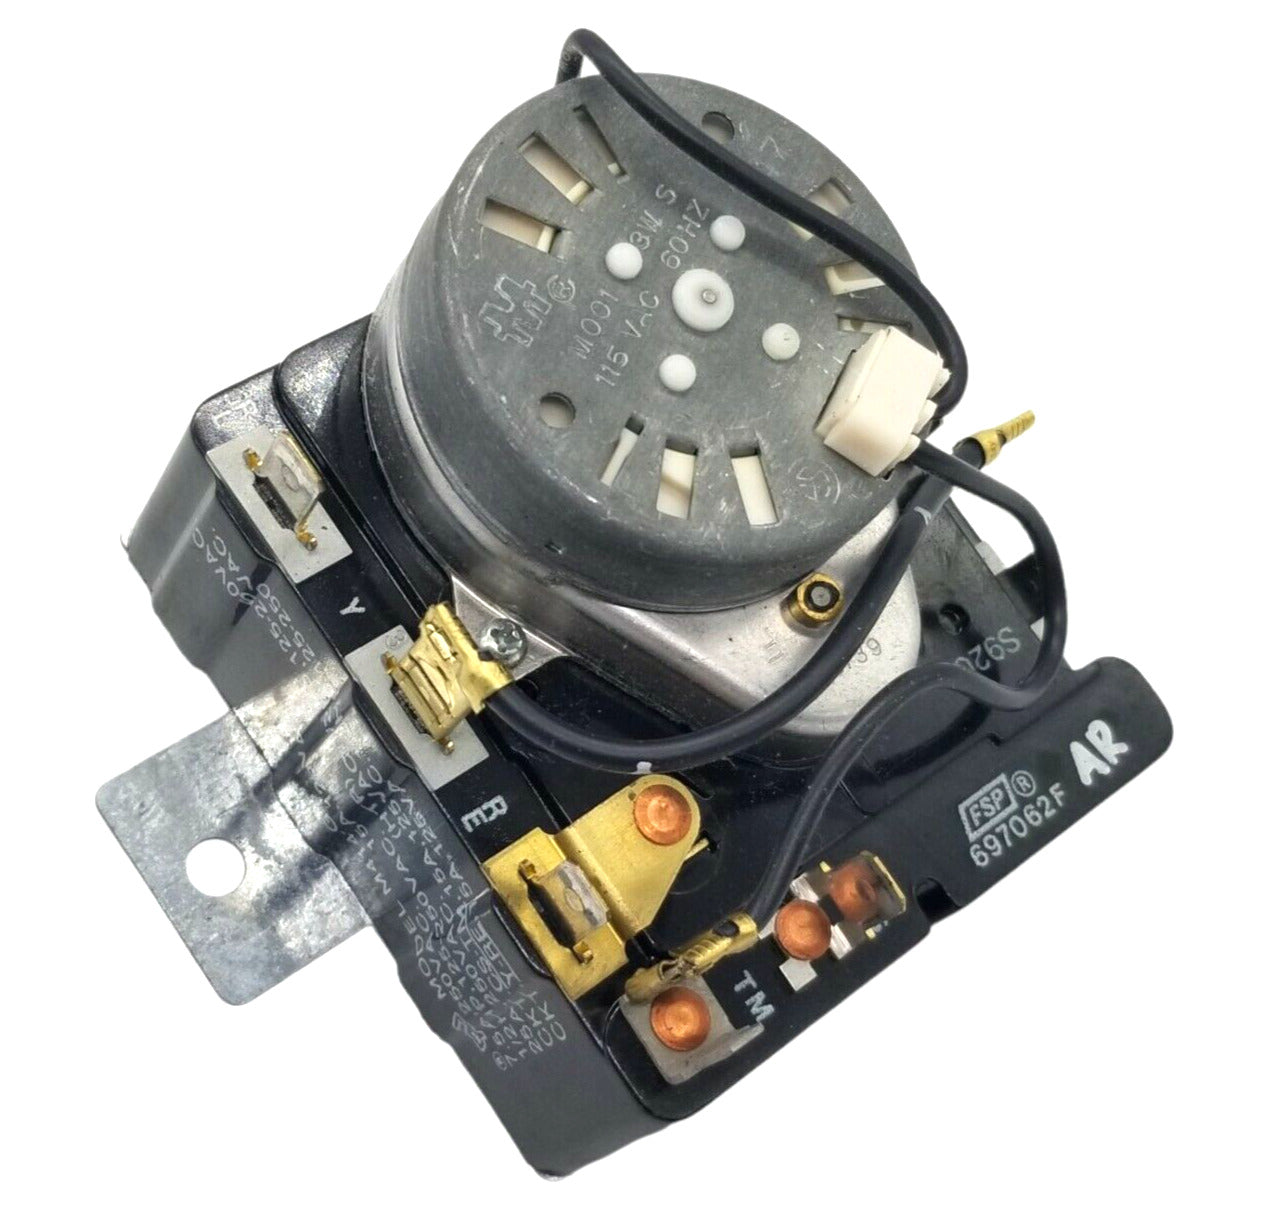 ⭐️OEM Replacement for KitchenAid Dryer Timer 697062F 697062🔥